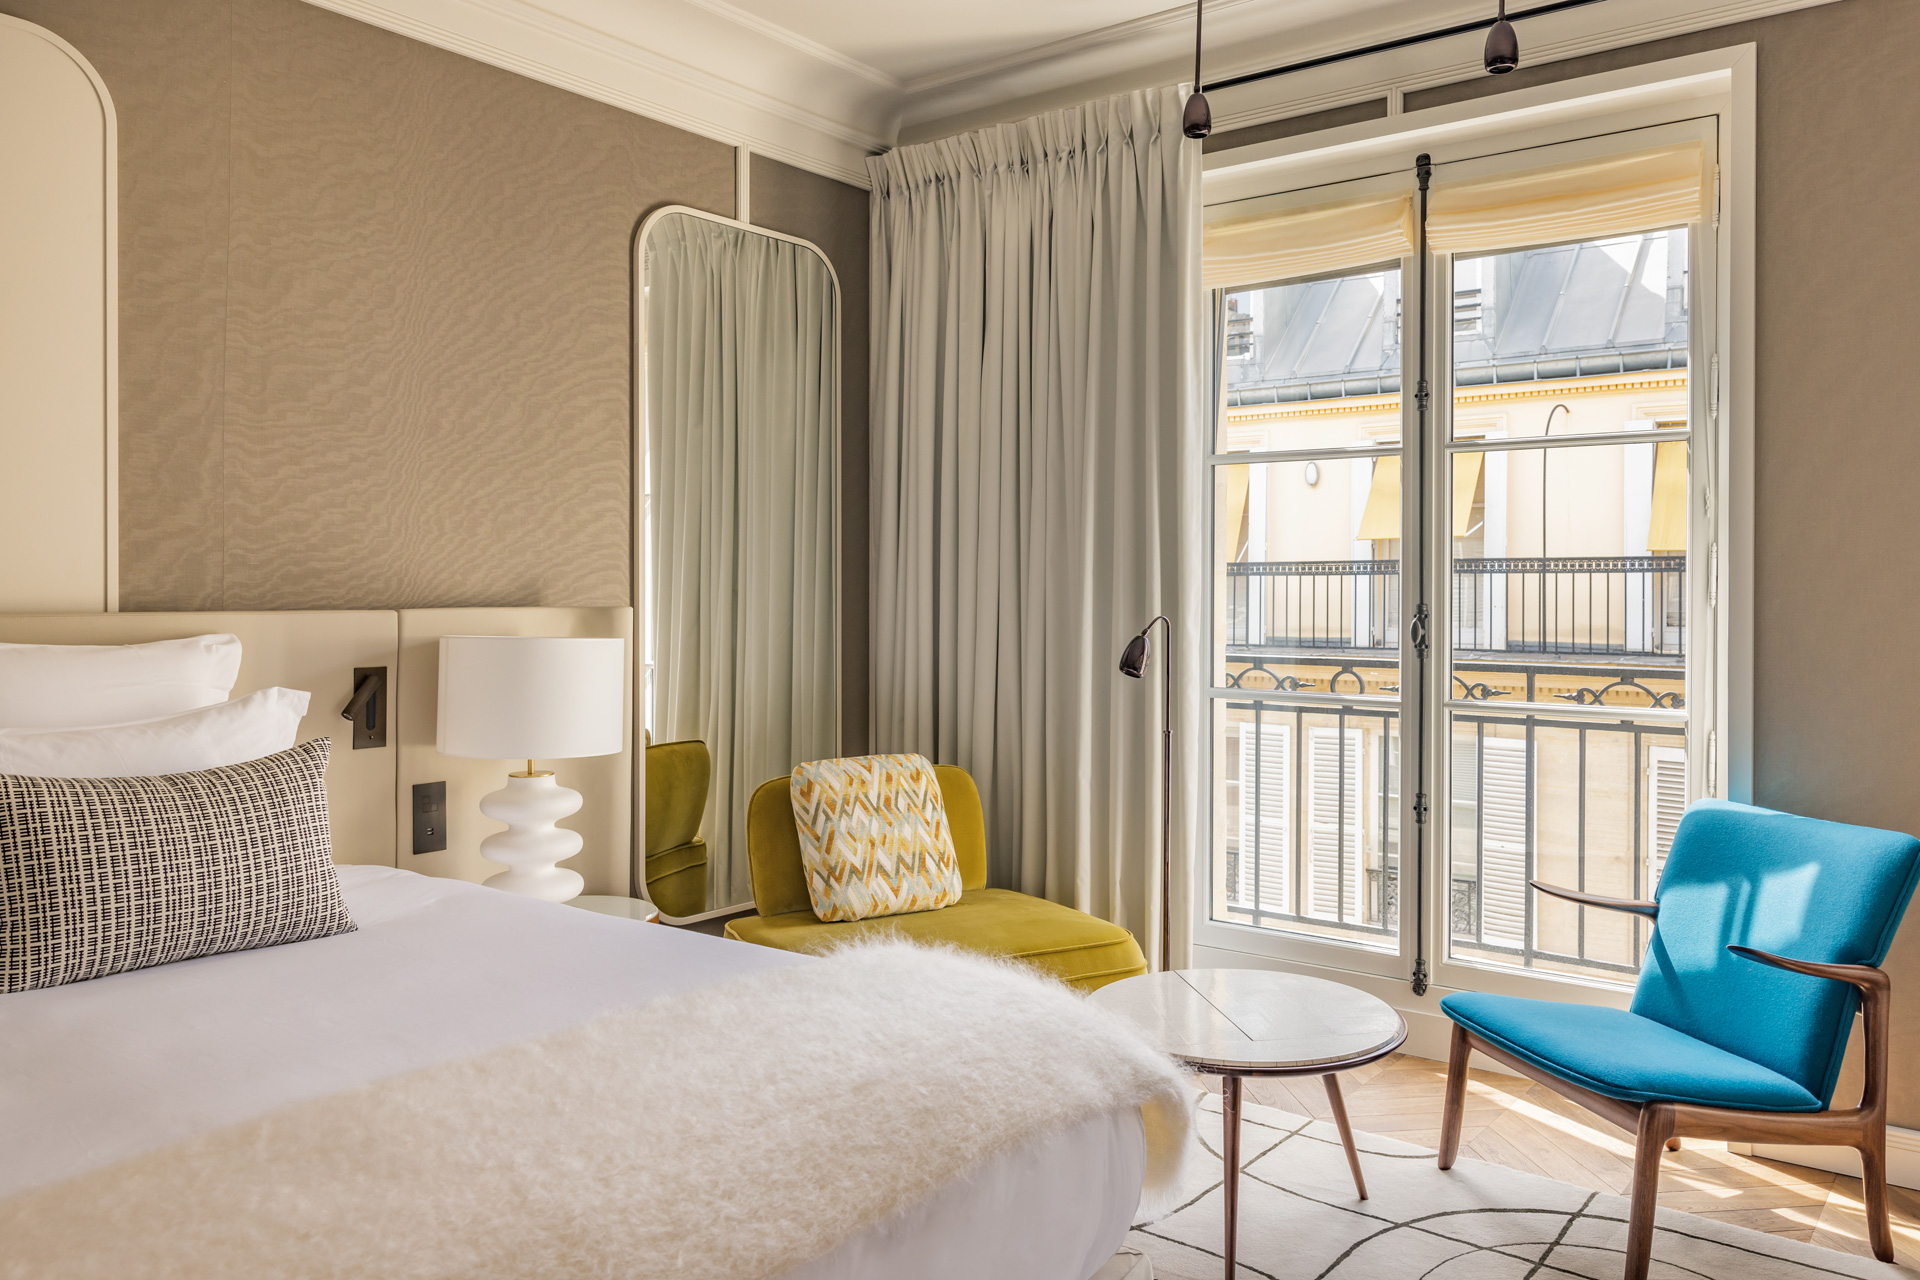 Bedroom at Pavillon Faubourg Saint-Germain in Paris, with white bedding, a blue velvet chair, and a view of typical Parisian apartments outside.